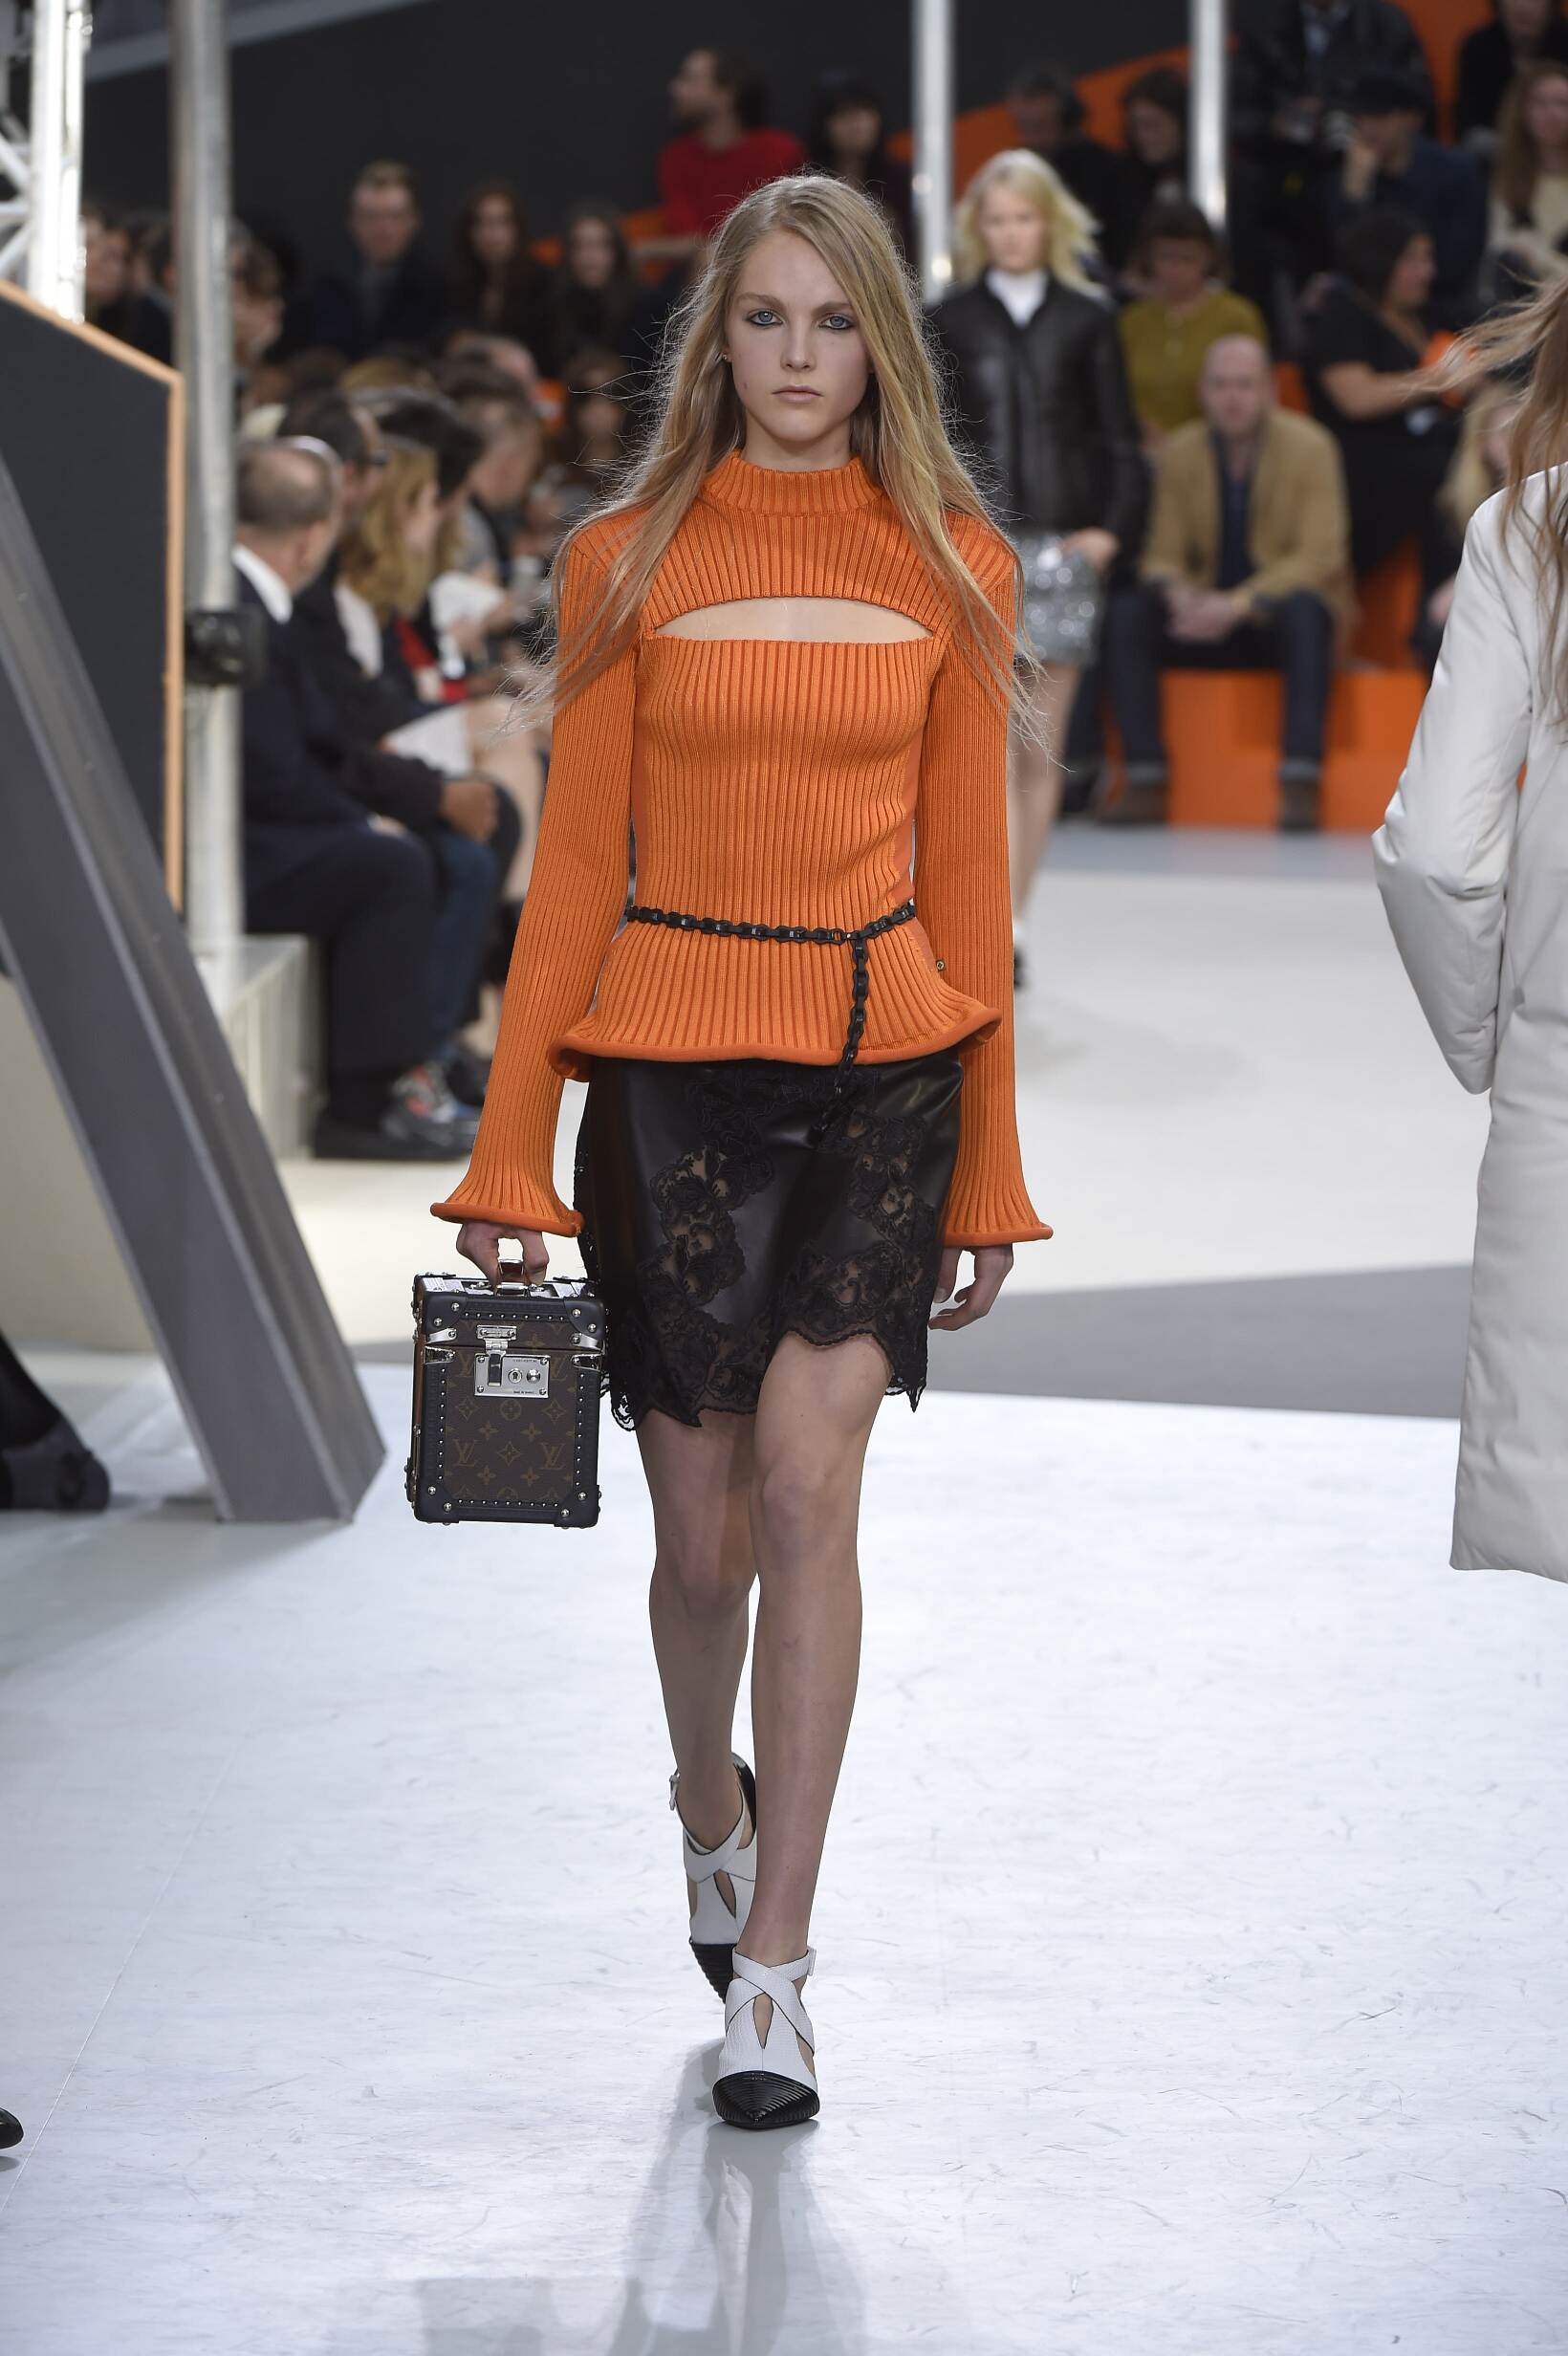 LOUIS VUITTON FALL WINTER 2015-16 WOMEN’S COLLECTION | The Skinny Beep